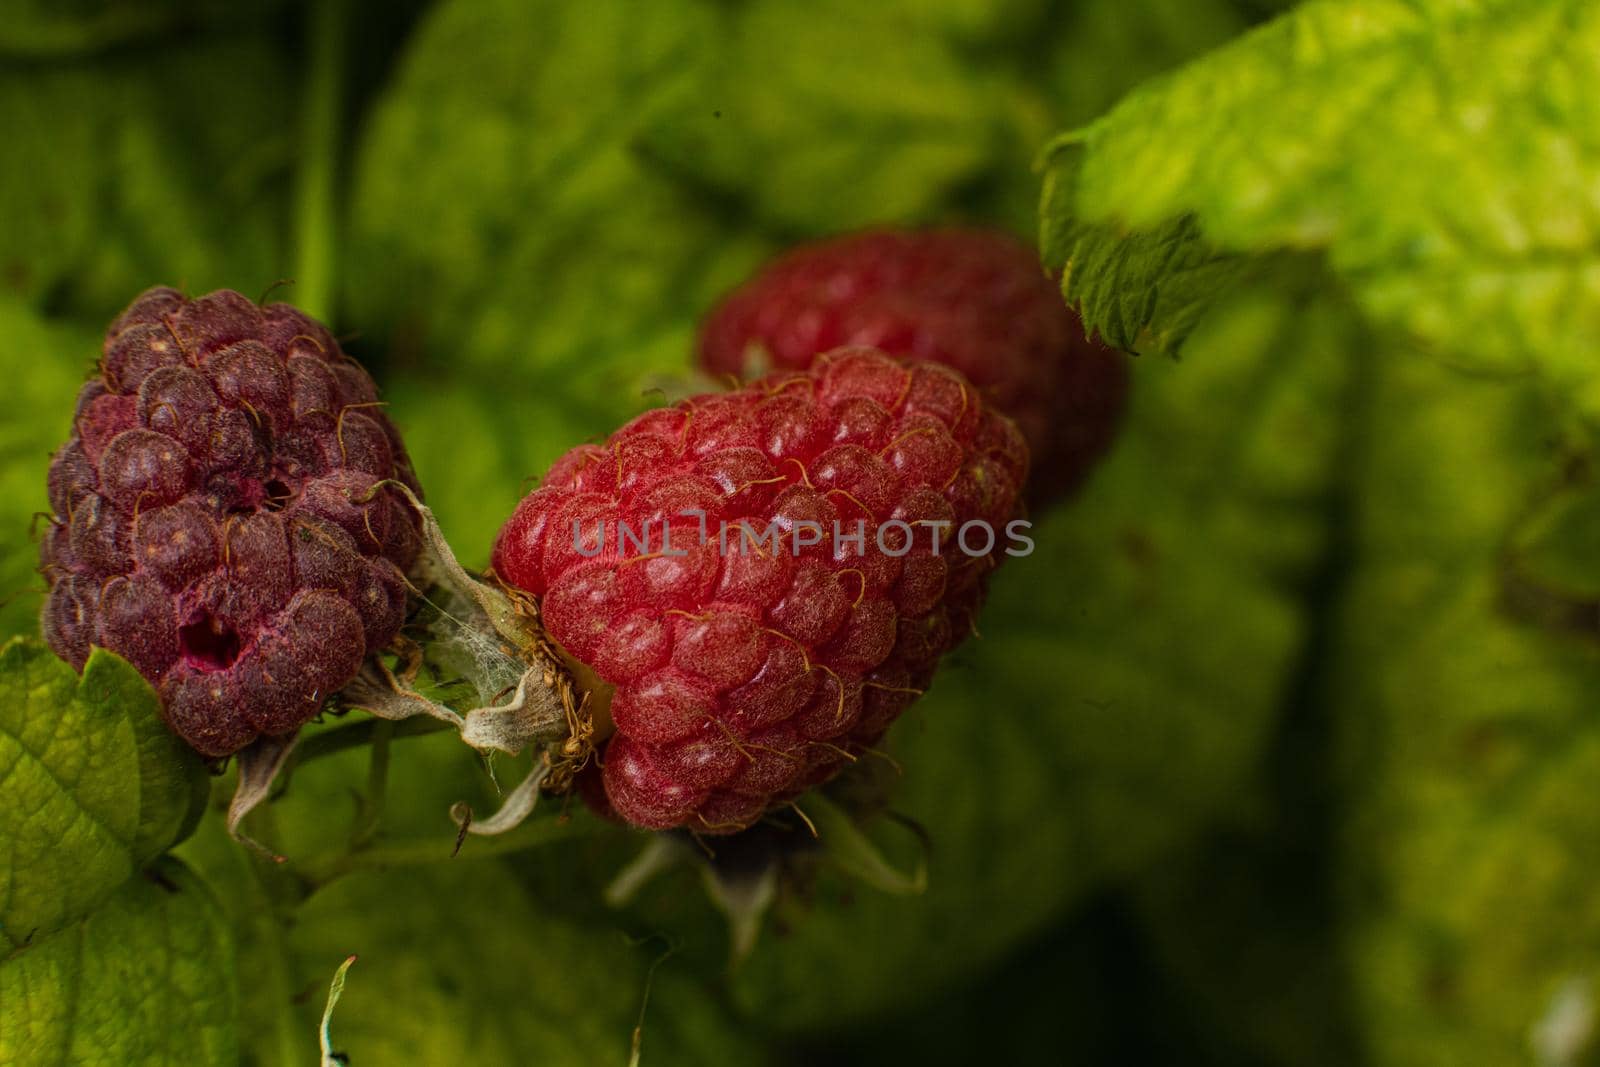 Picture of raspberry berries ripened on a branch in the forest. a few pink berries hang on a branch with blur background